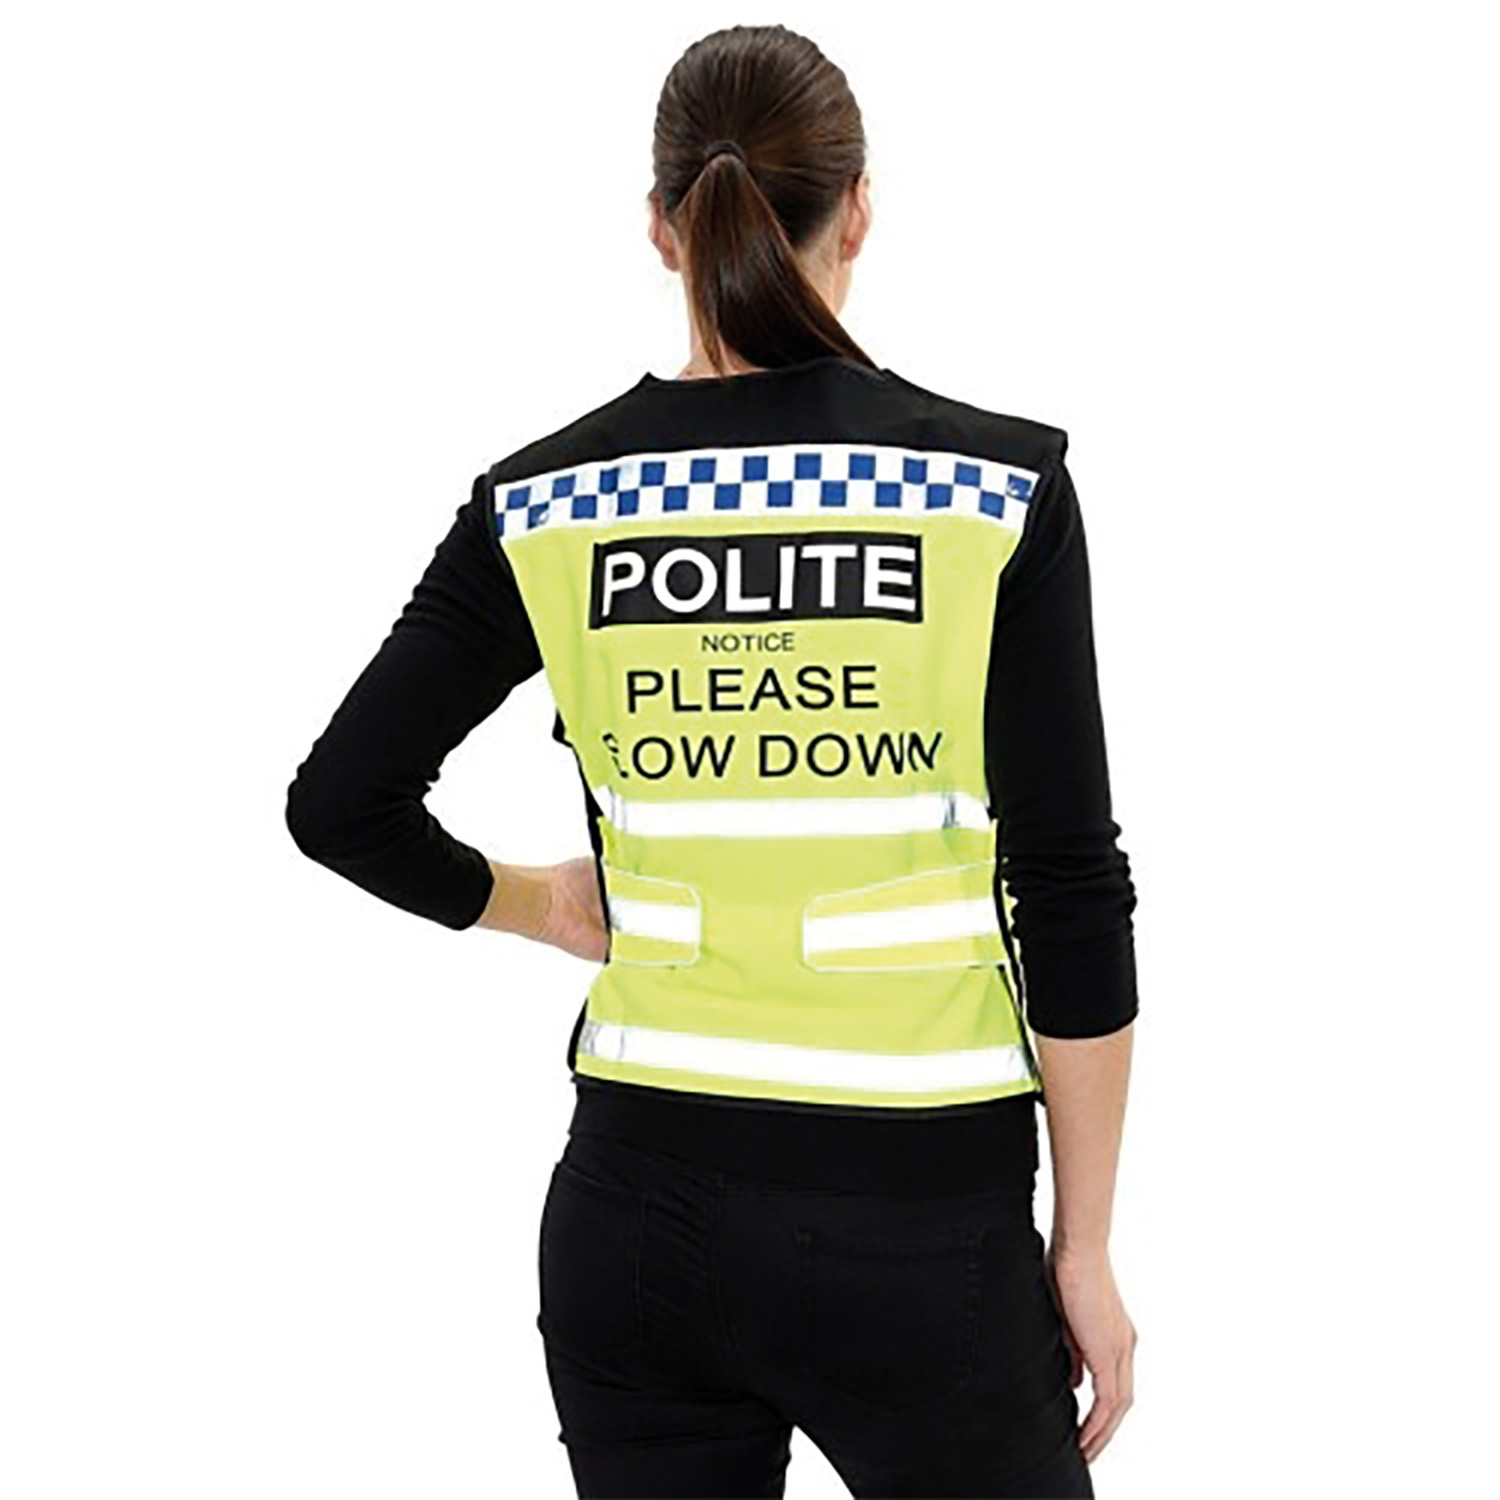 EQUISAFETY POLITE WAISTCOAT PLEASE SLOW DOWN CHILD / SMALL CHILD / SMALL